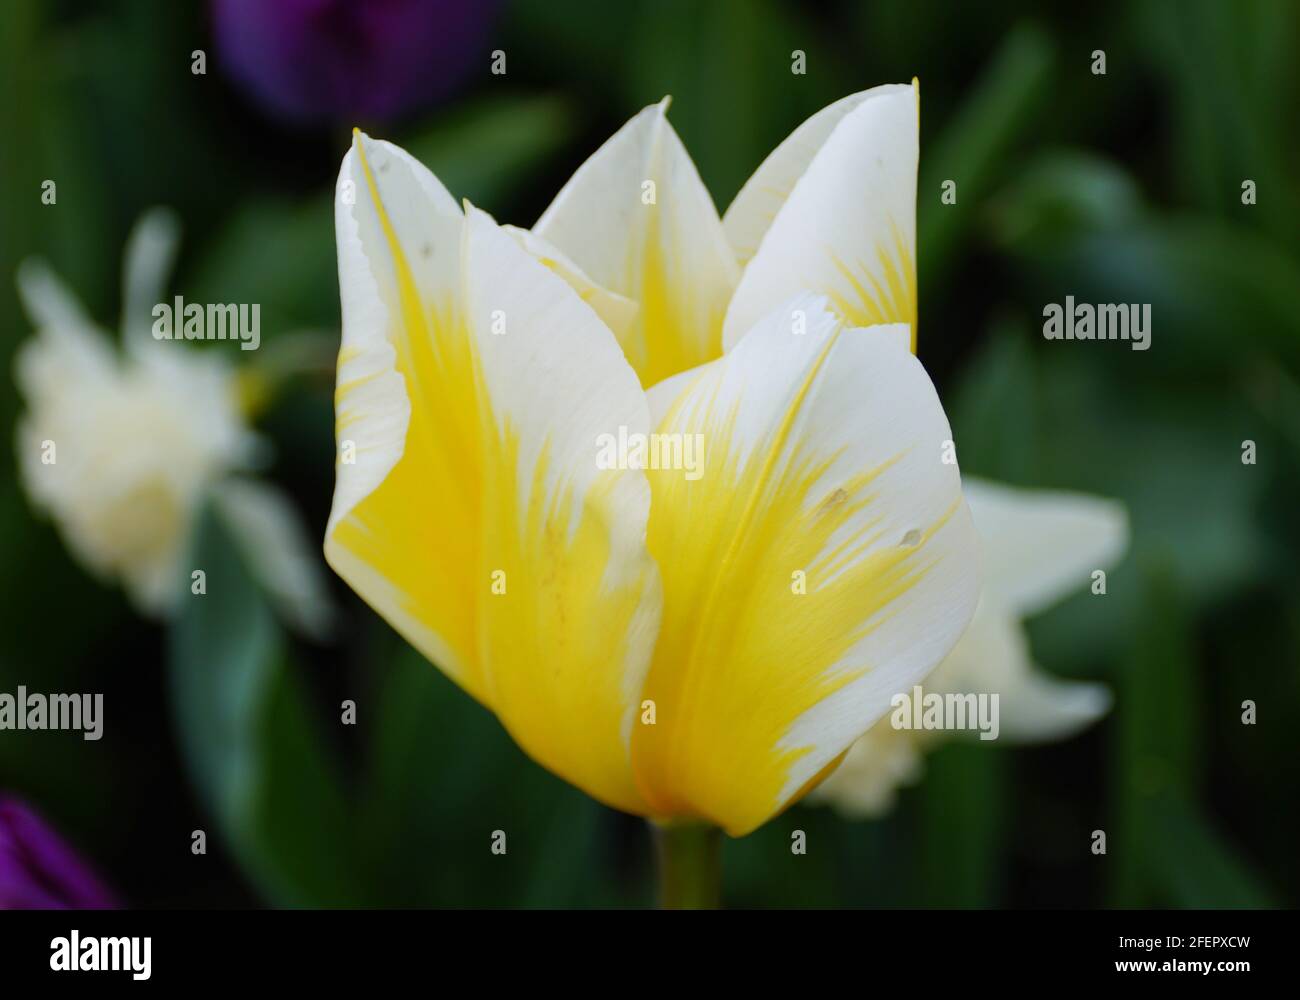 leBeautiful bi-color of yellow and white Fosteriana tulip 'Sweetheart' flowers Stock Photo